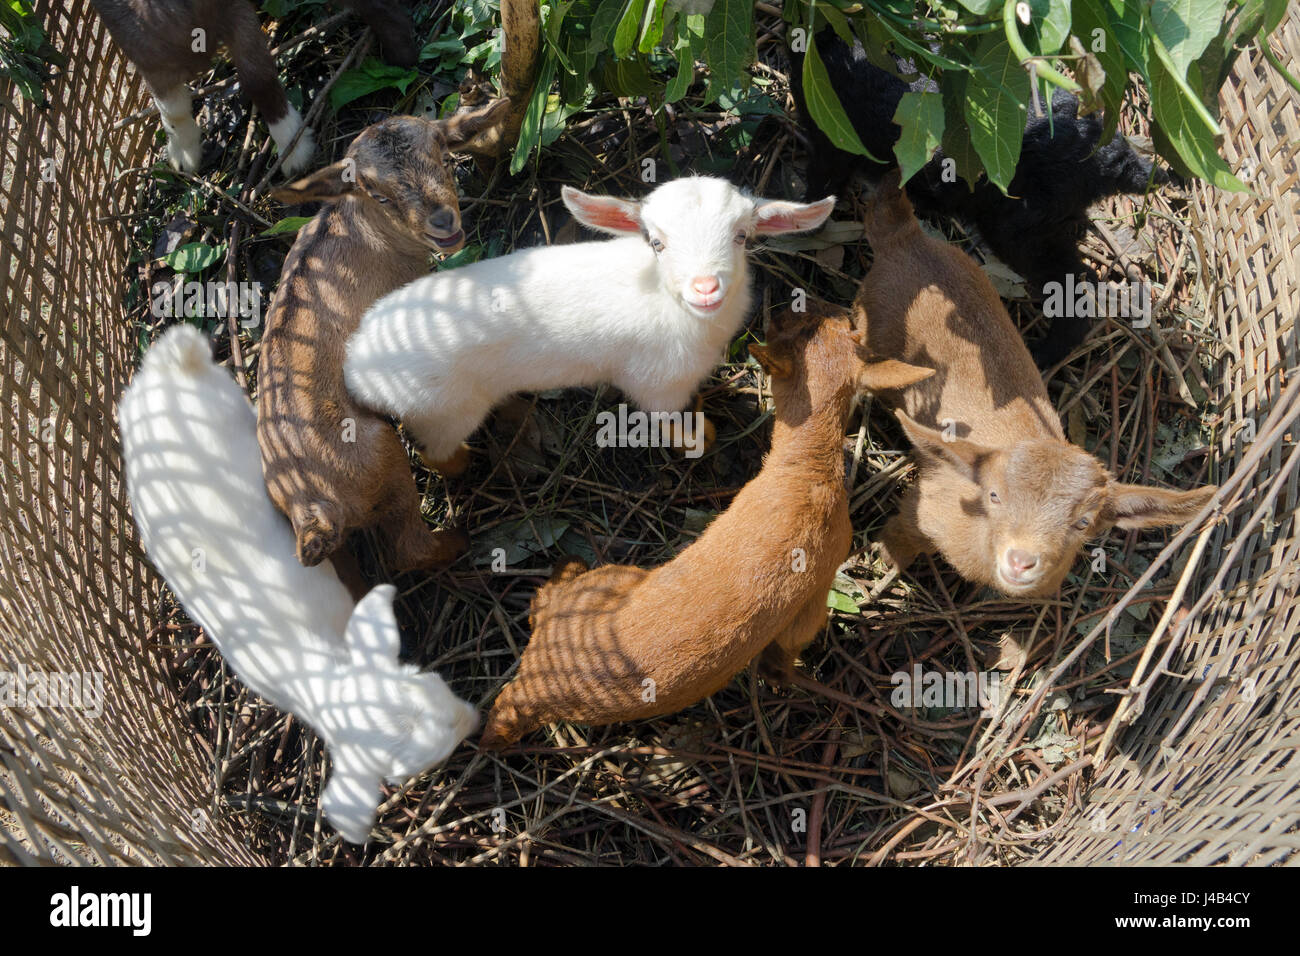 Young goats kept in a small pen made of braided bamboo. Near Ghandruk, Annapurna region, Nepal. Stock Photo